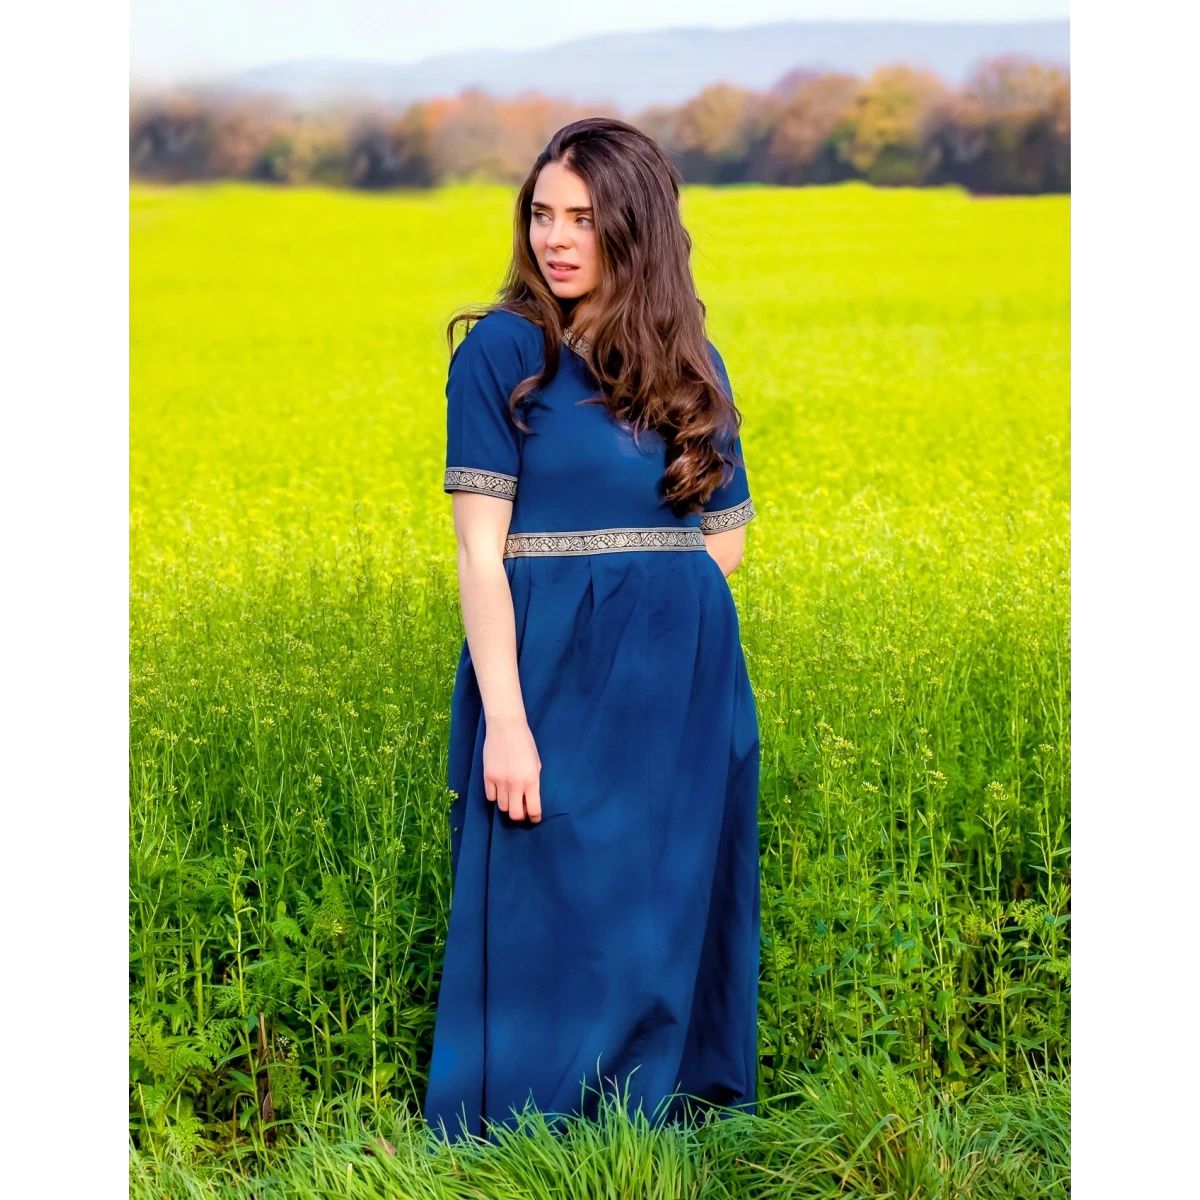 Blue Viking Dress with Intricate Embroidery - Short Sleeves